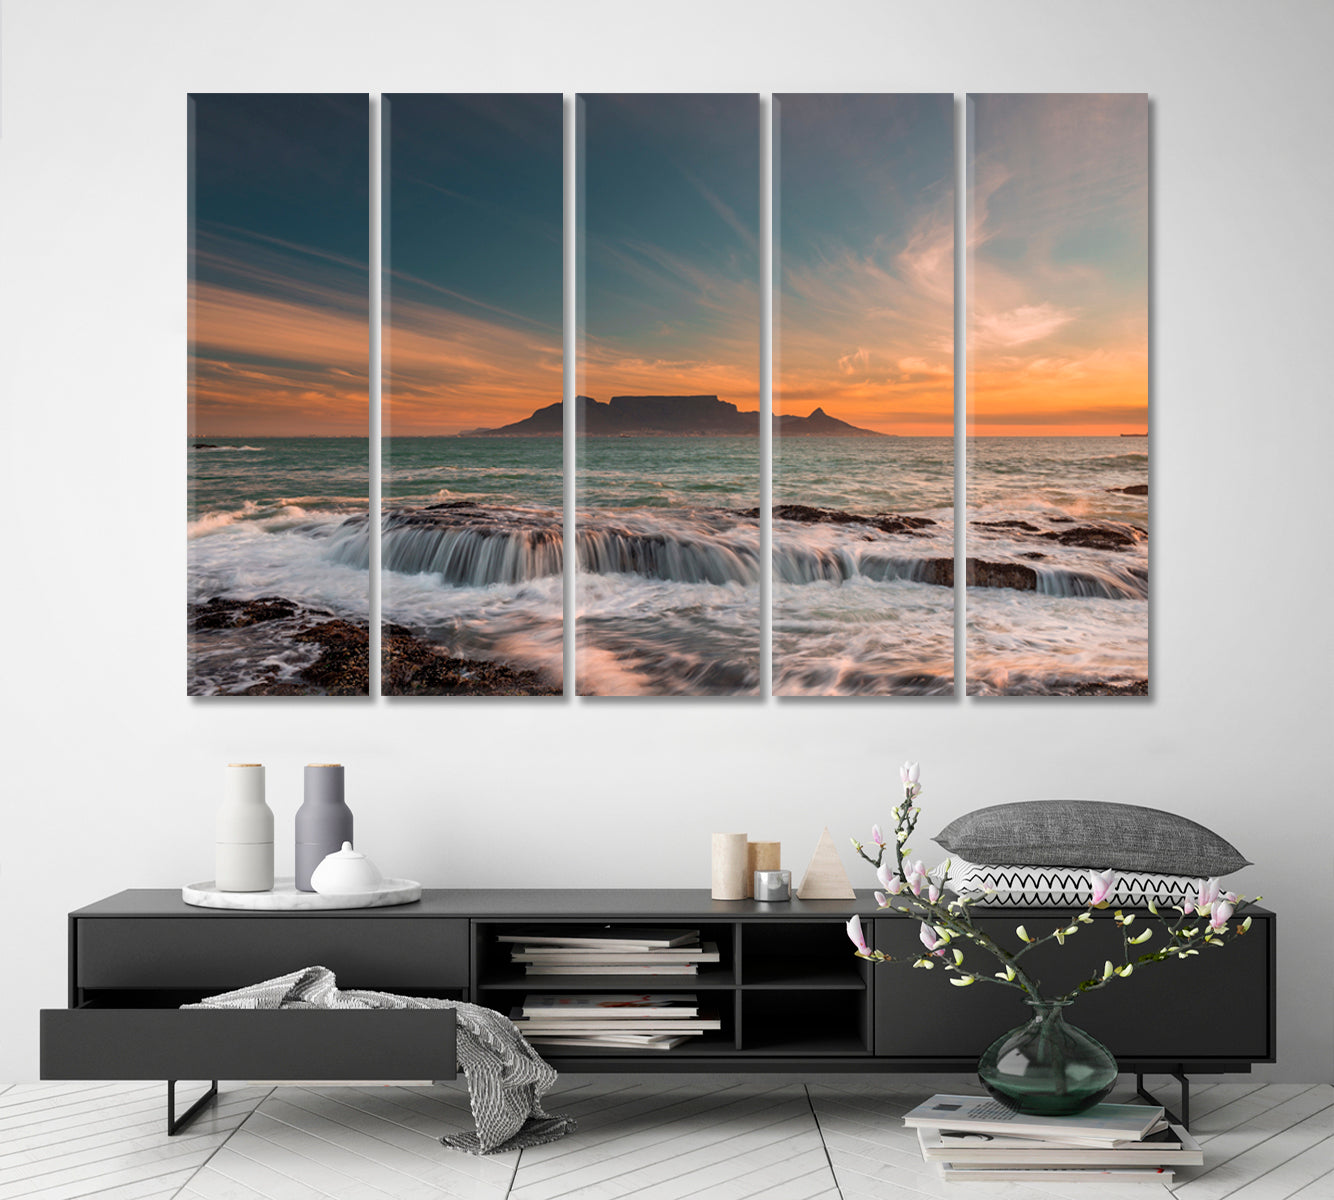 Table Mountain Sunset Cape Town South Africa Nature Wall Canvas Print Artesty 5 panels 36" x 24" 